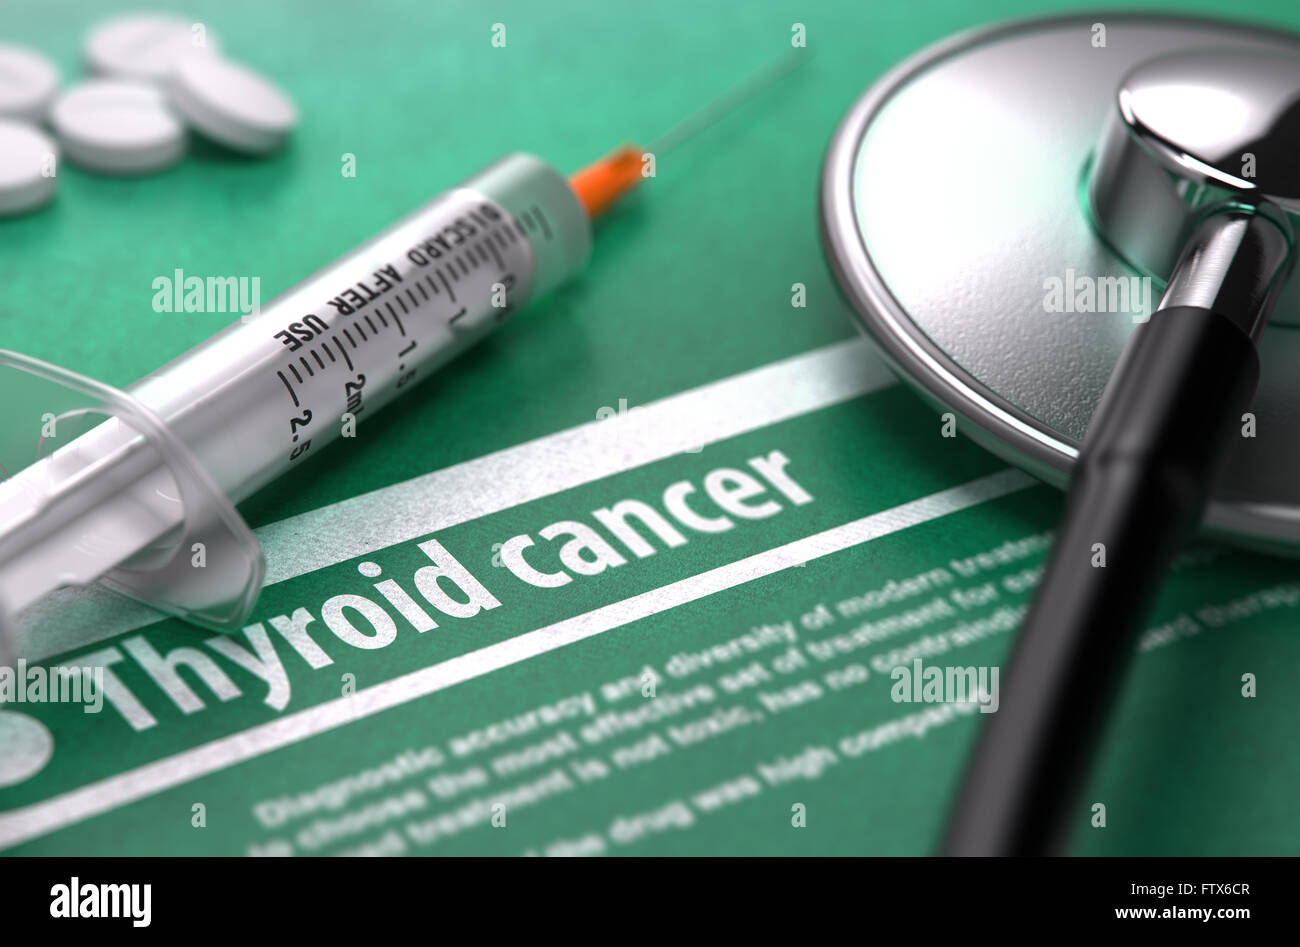 Thyroid Cancer. Medical Concept on Green Background. Stock Photo